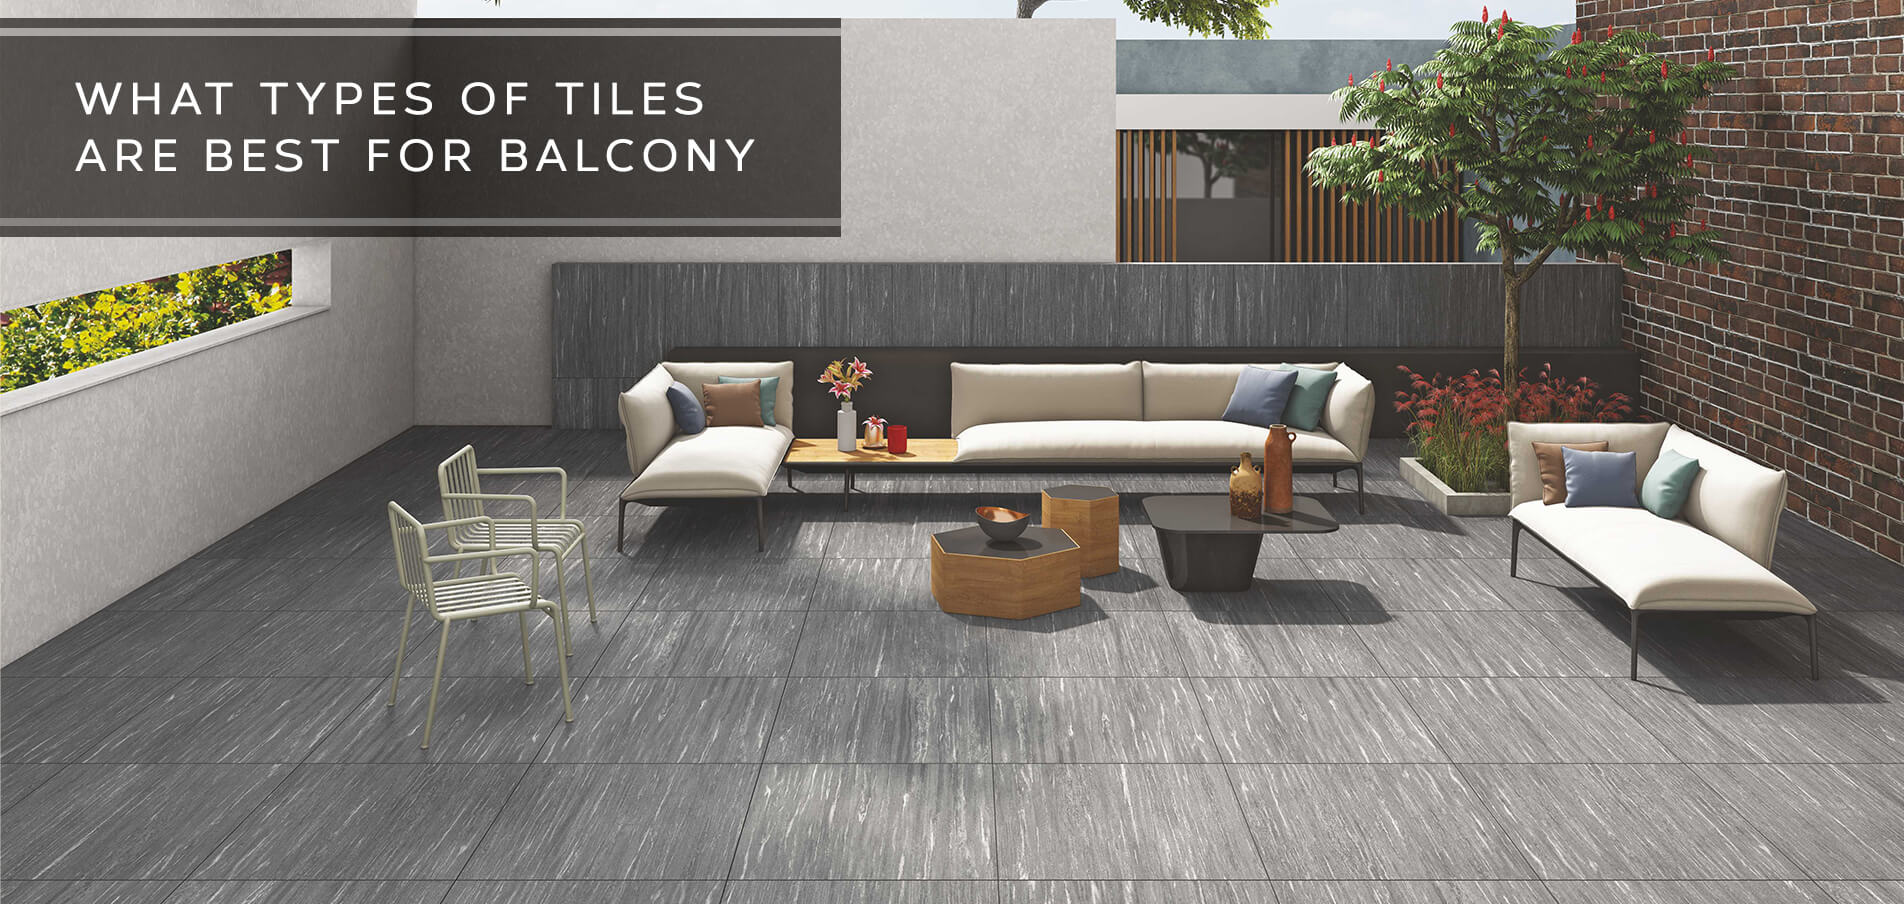 Choosing the Ideal Ceramic Tiles for Your Balcony Space